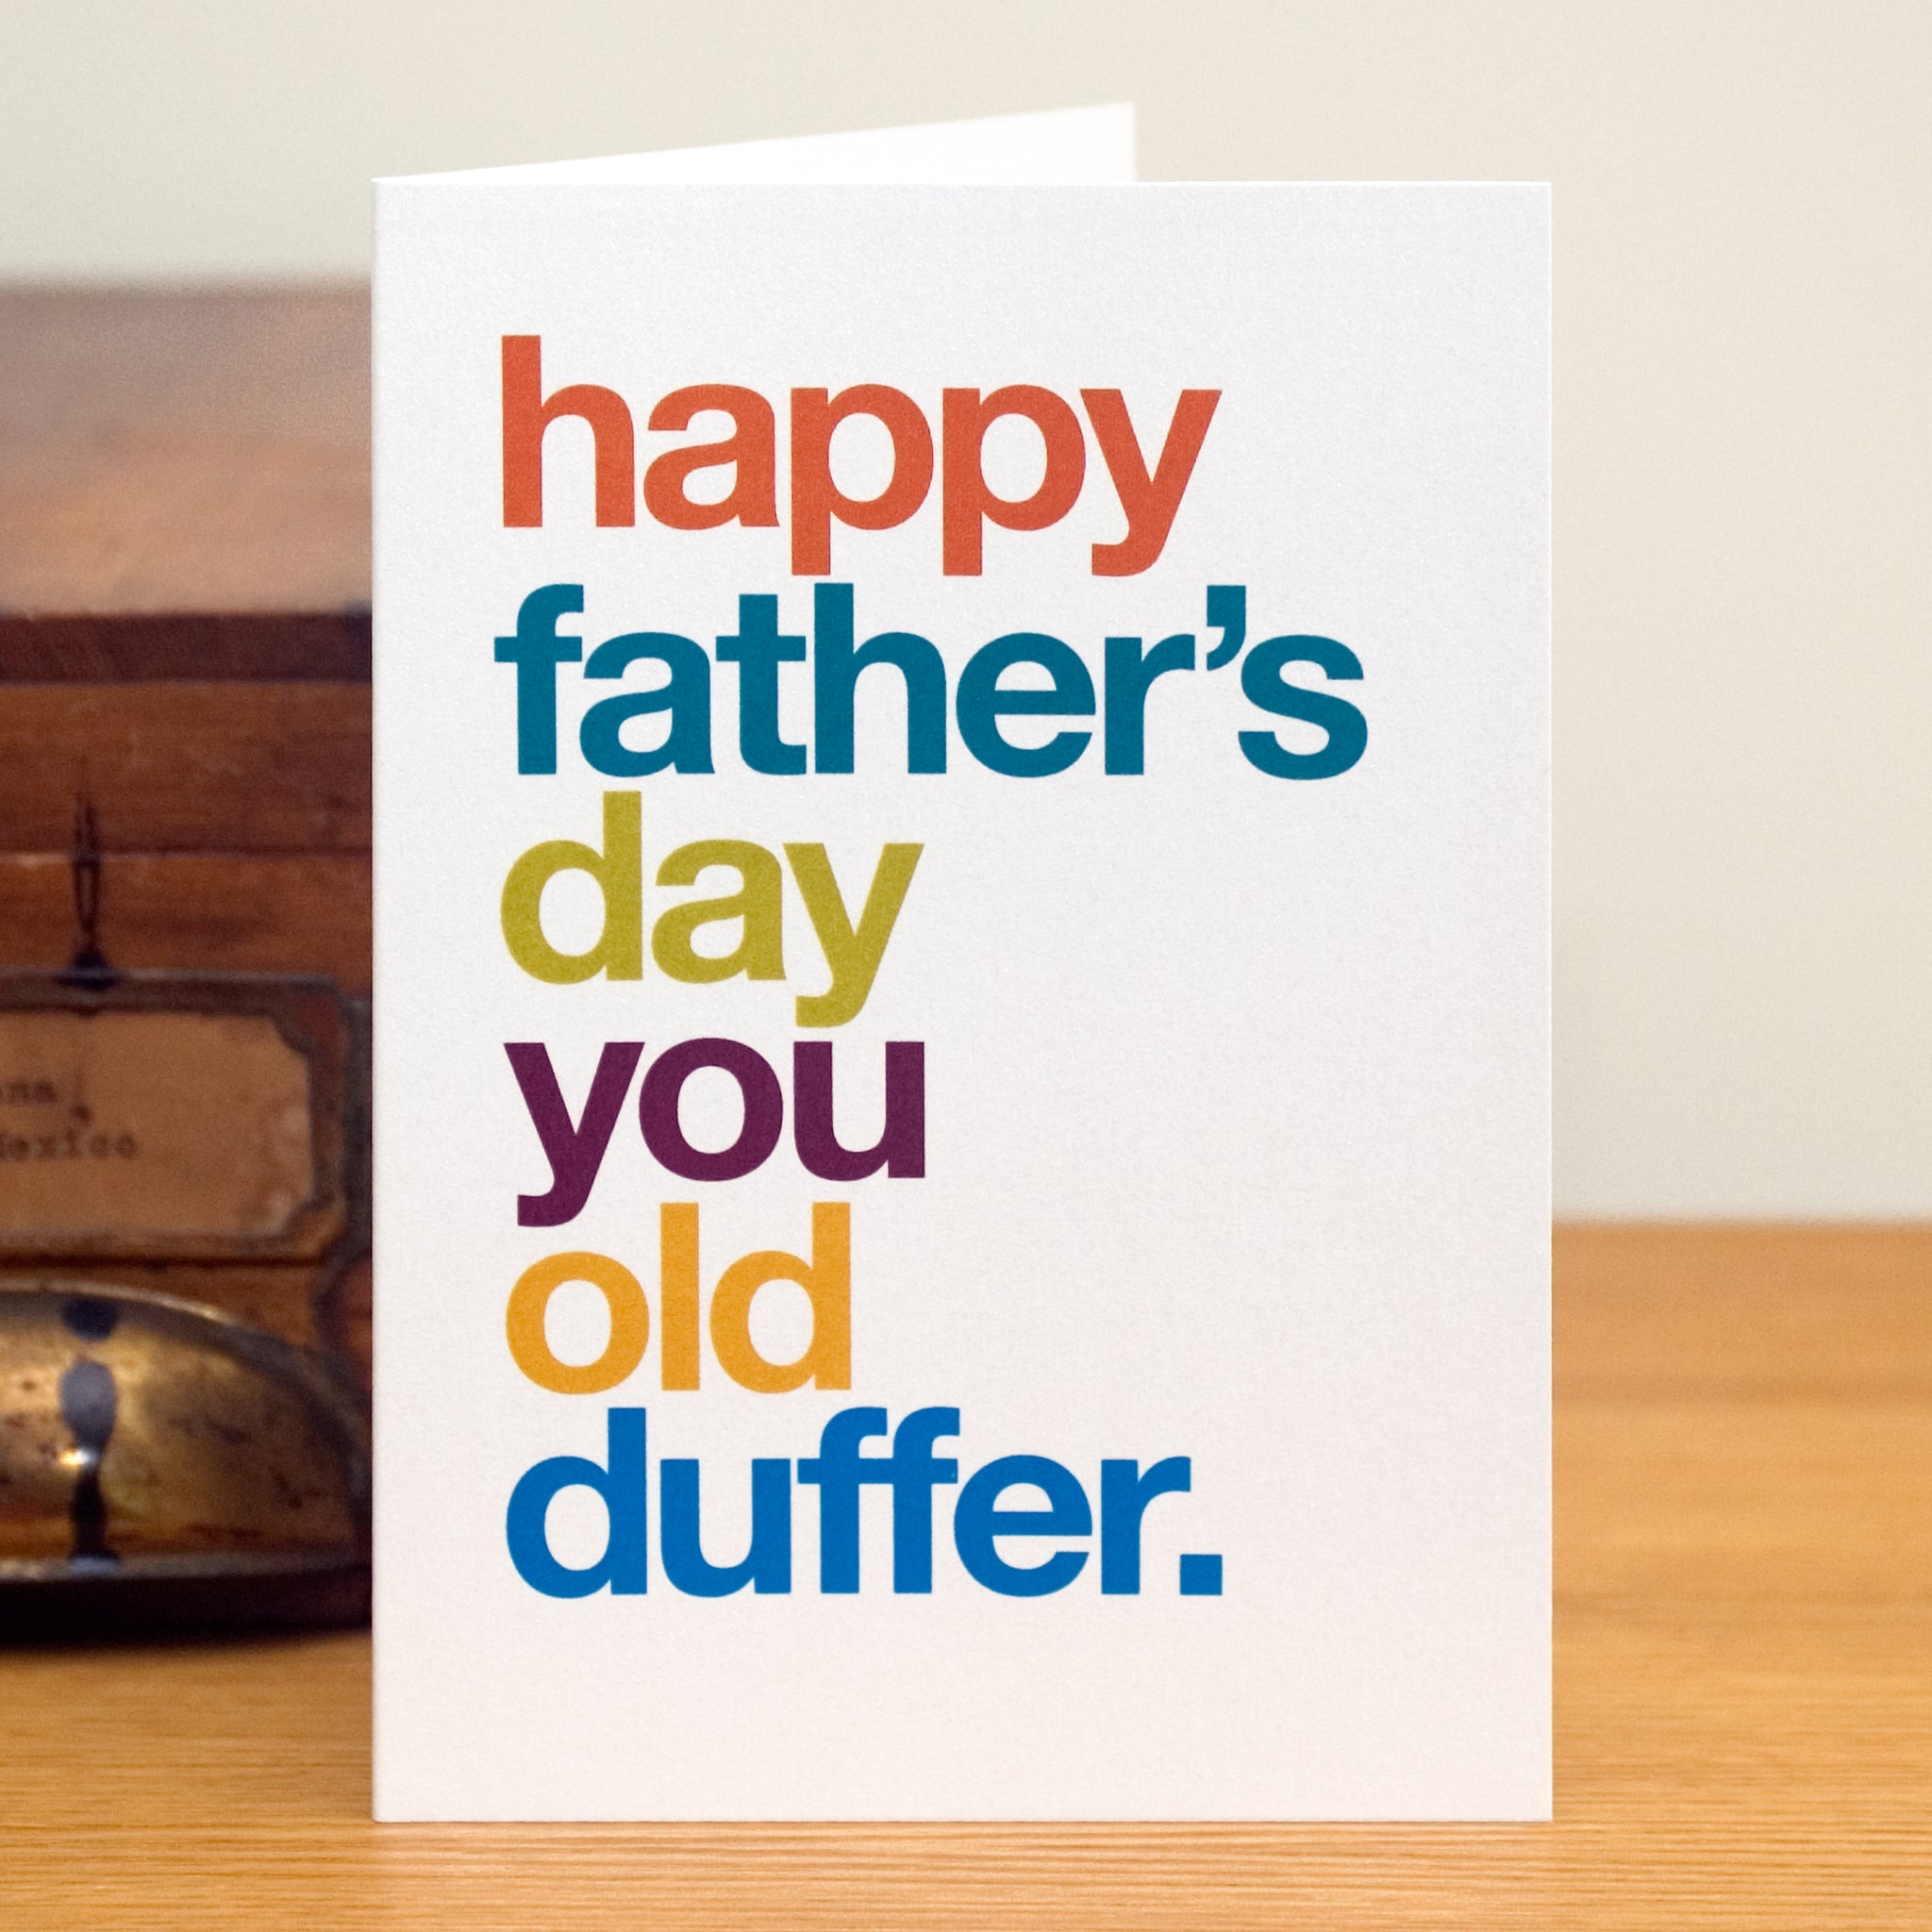 A funny greetings card saying 'happy father's day you old duffer'.